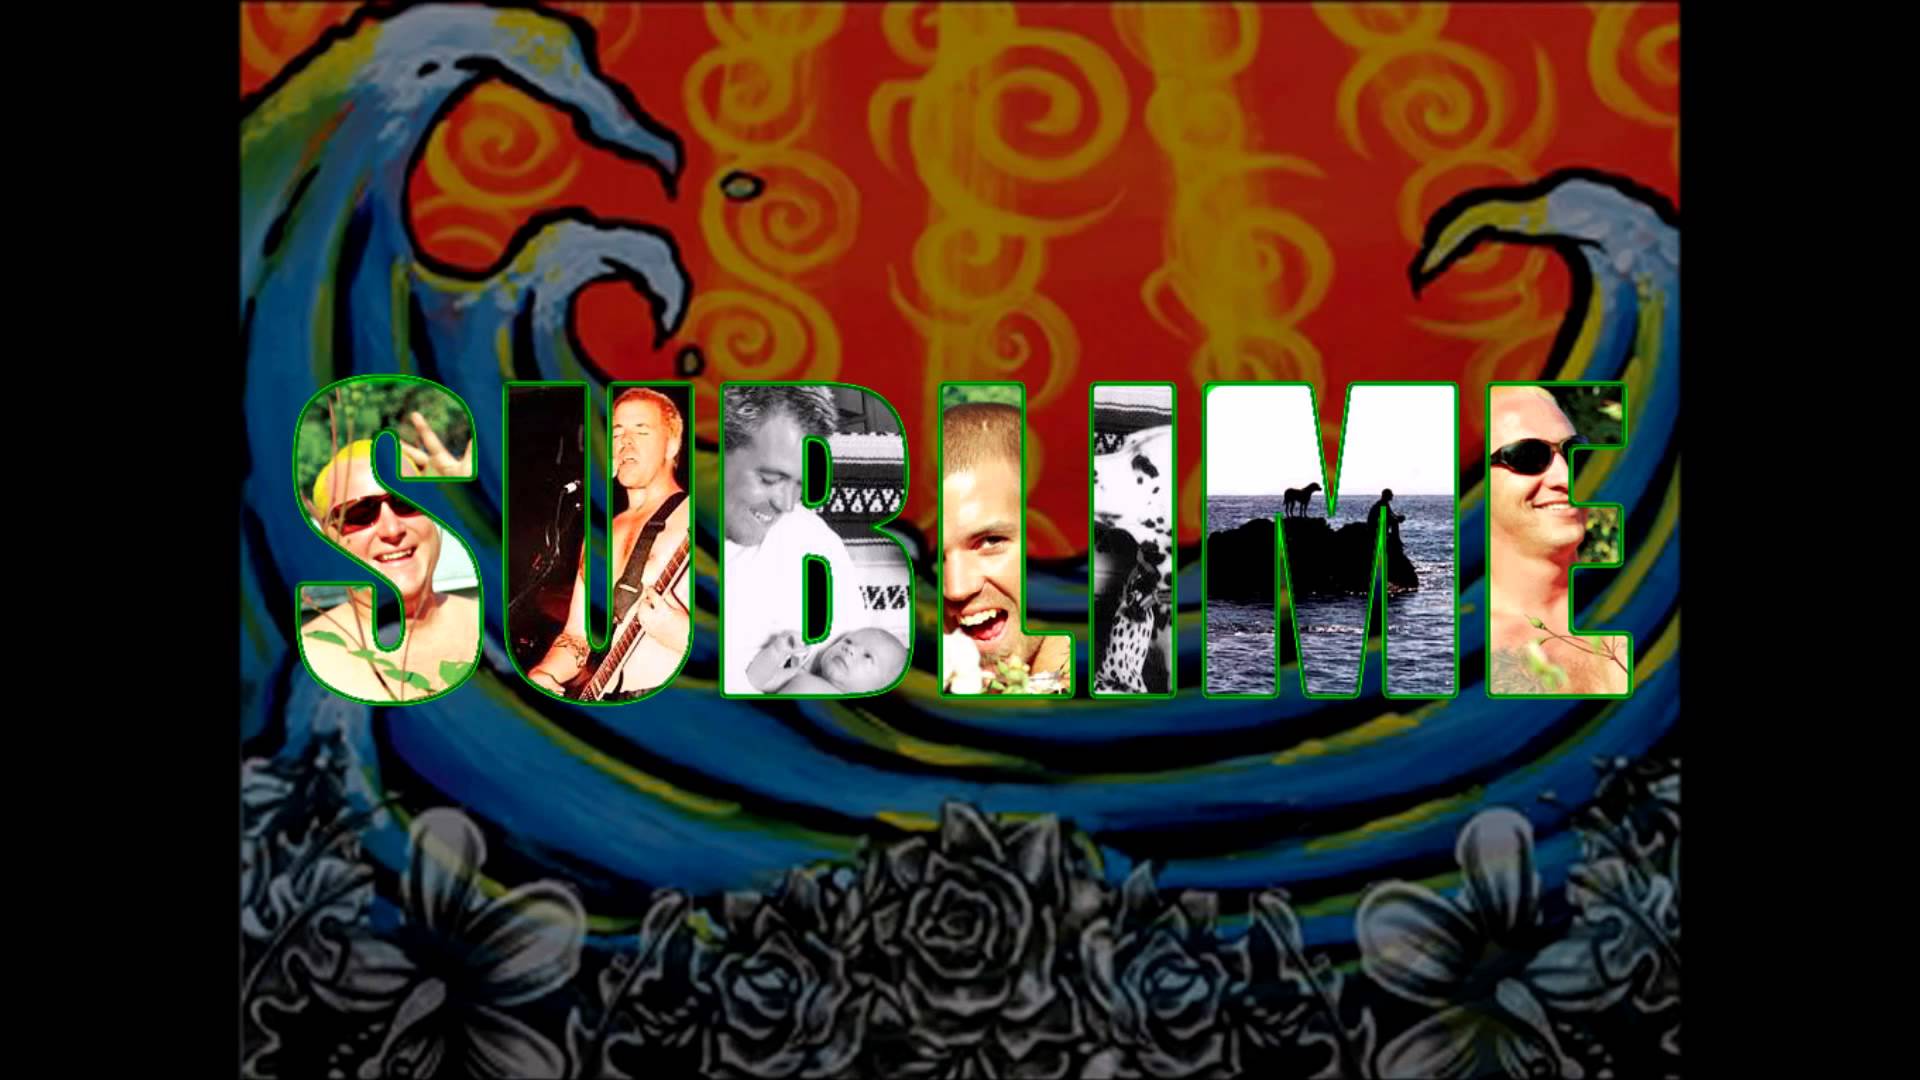 free sublime mp3